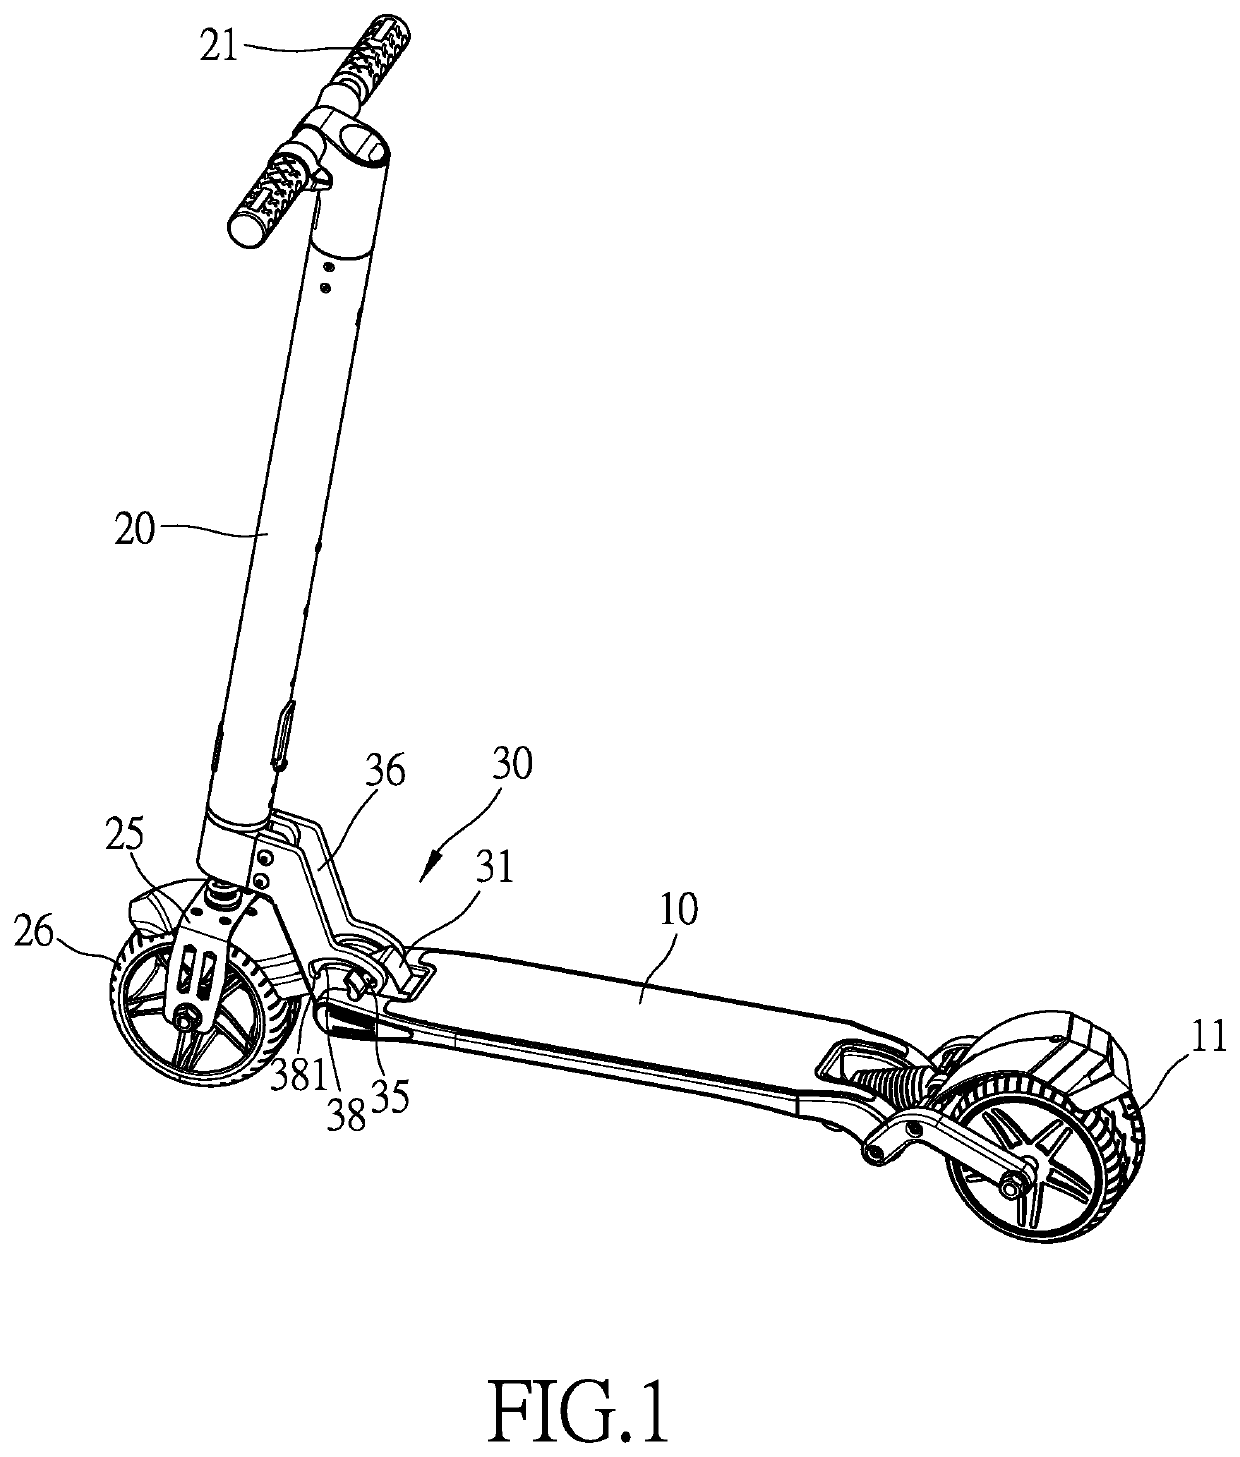 Structure of kick scooter